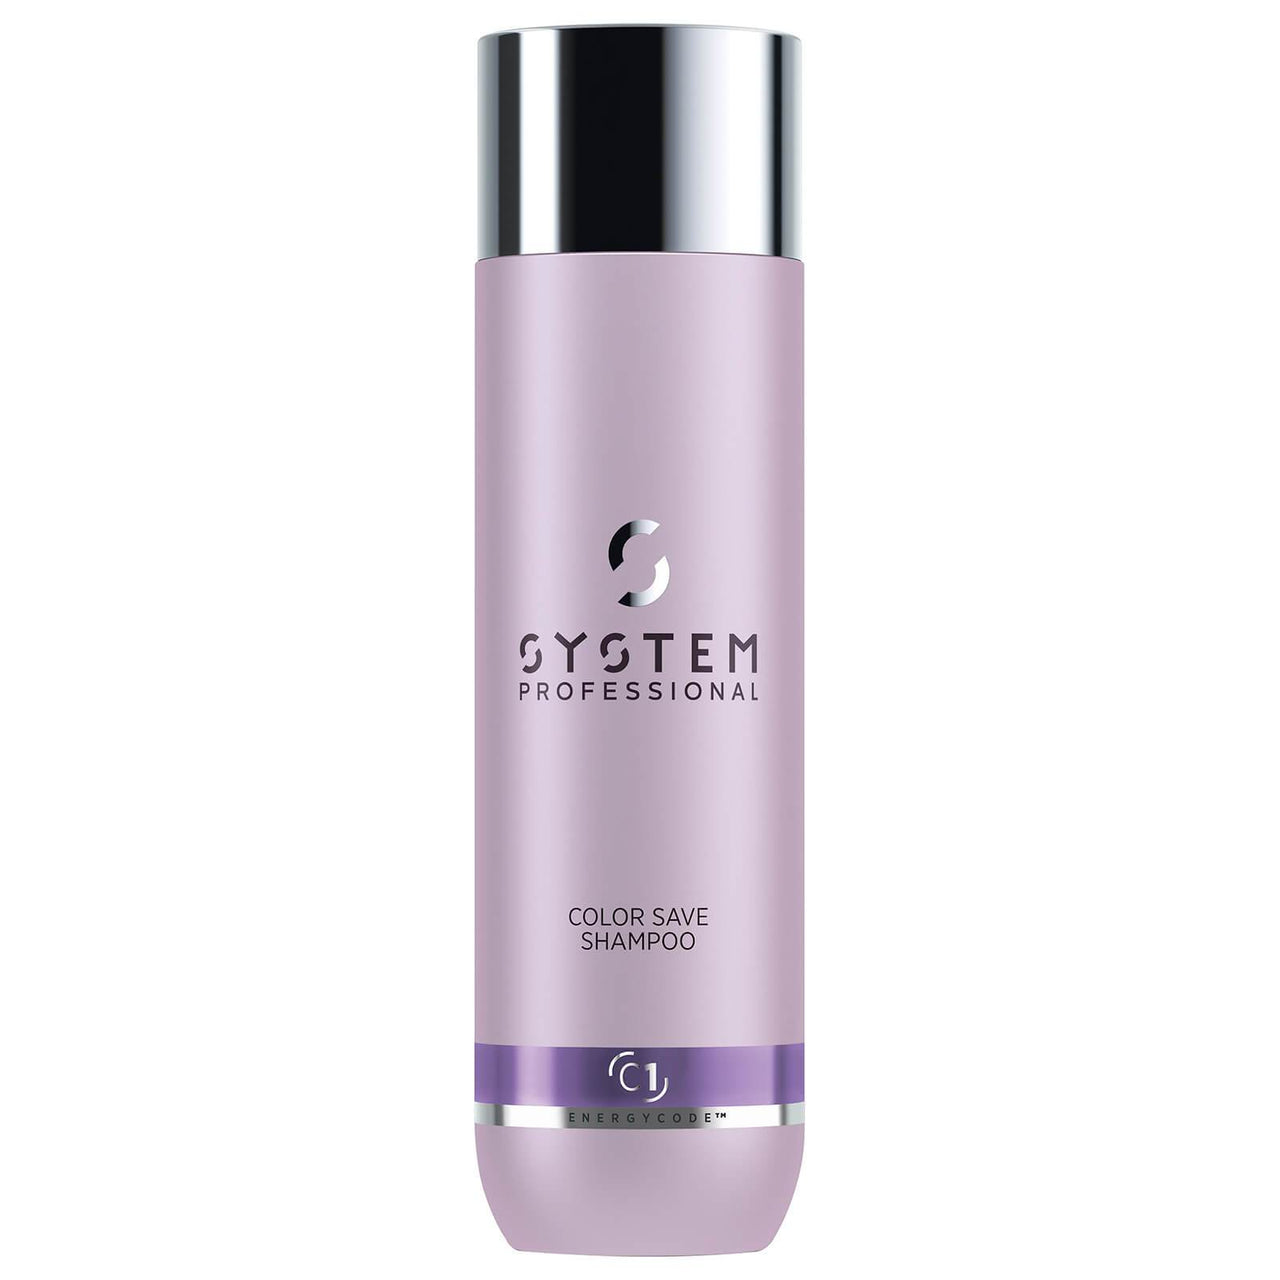 System Professional Color Save Shampoo 250mls